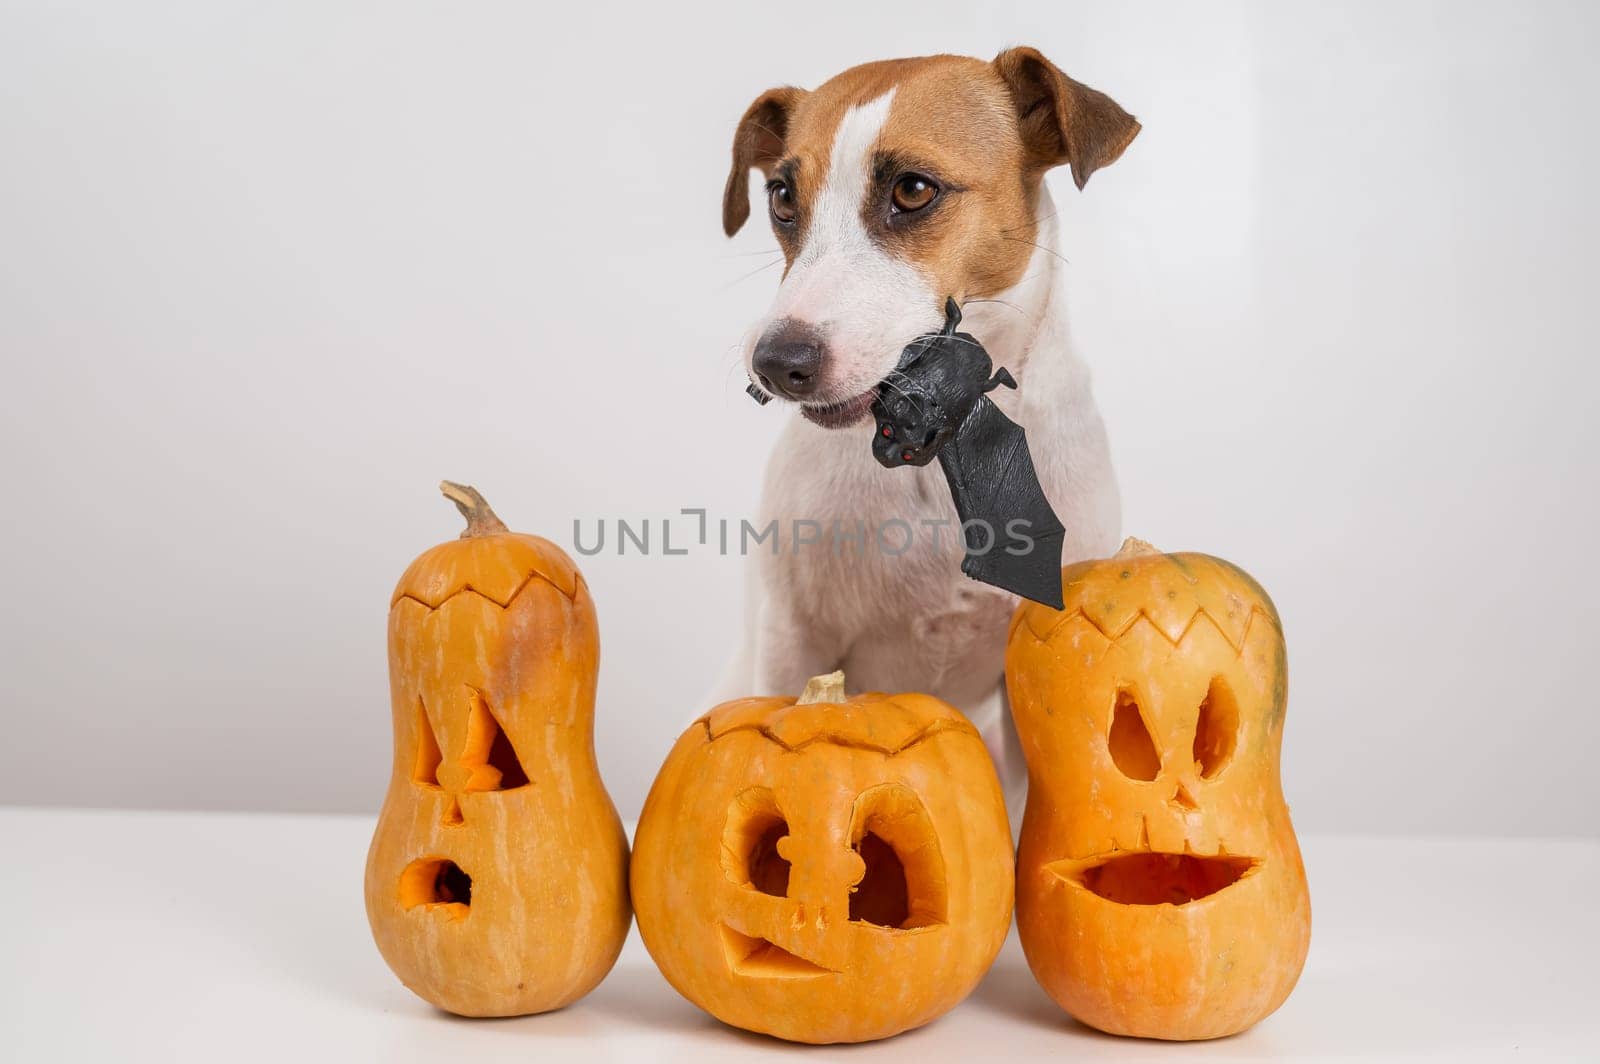 Jack Russell Terrier dog holding a bat next to three jack-o-lanterns on a white background. by mrwed54